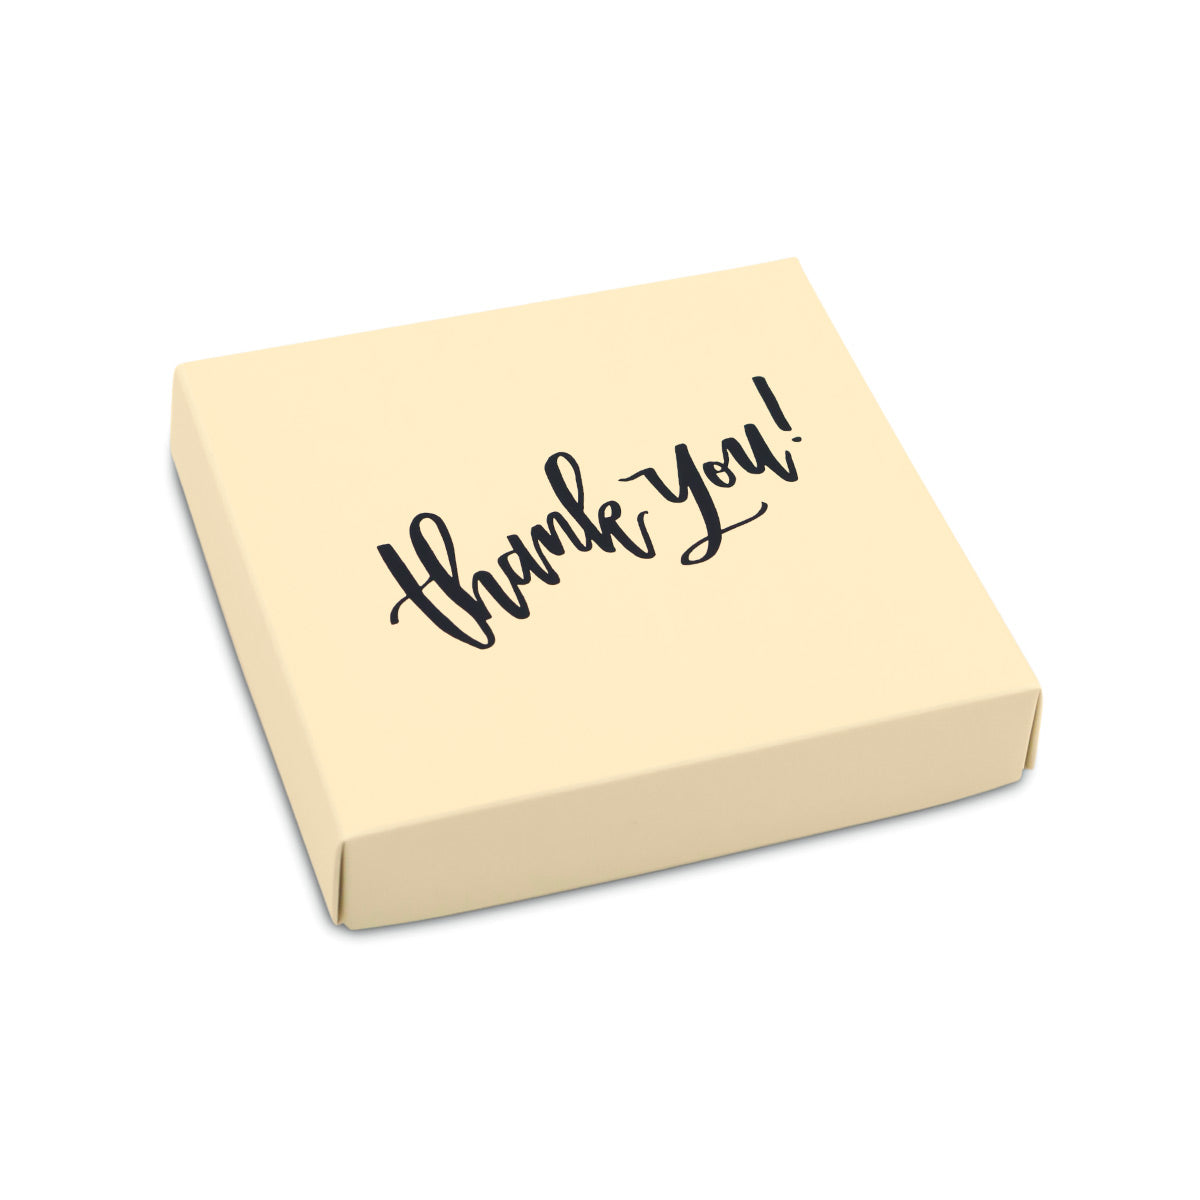 Thank You Themed Box Cover for 16 Piece Holiday Assortment